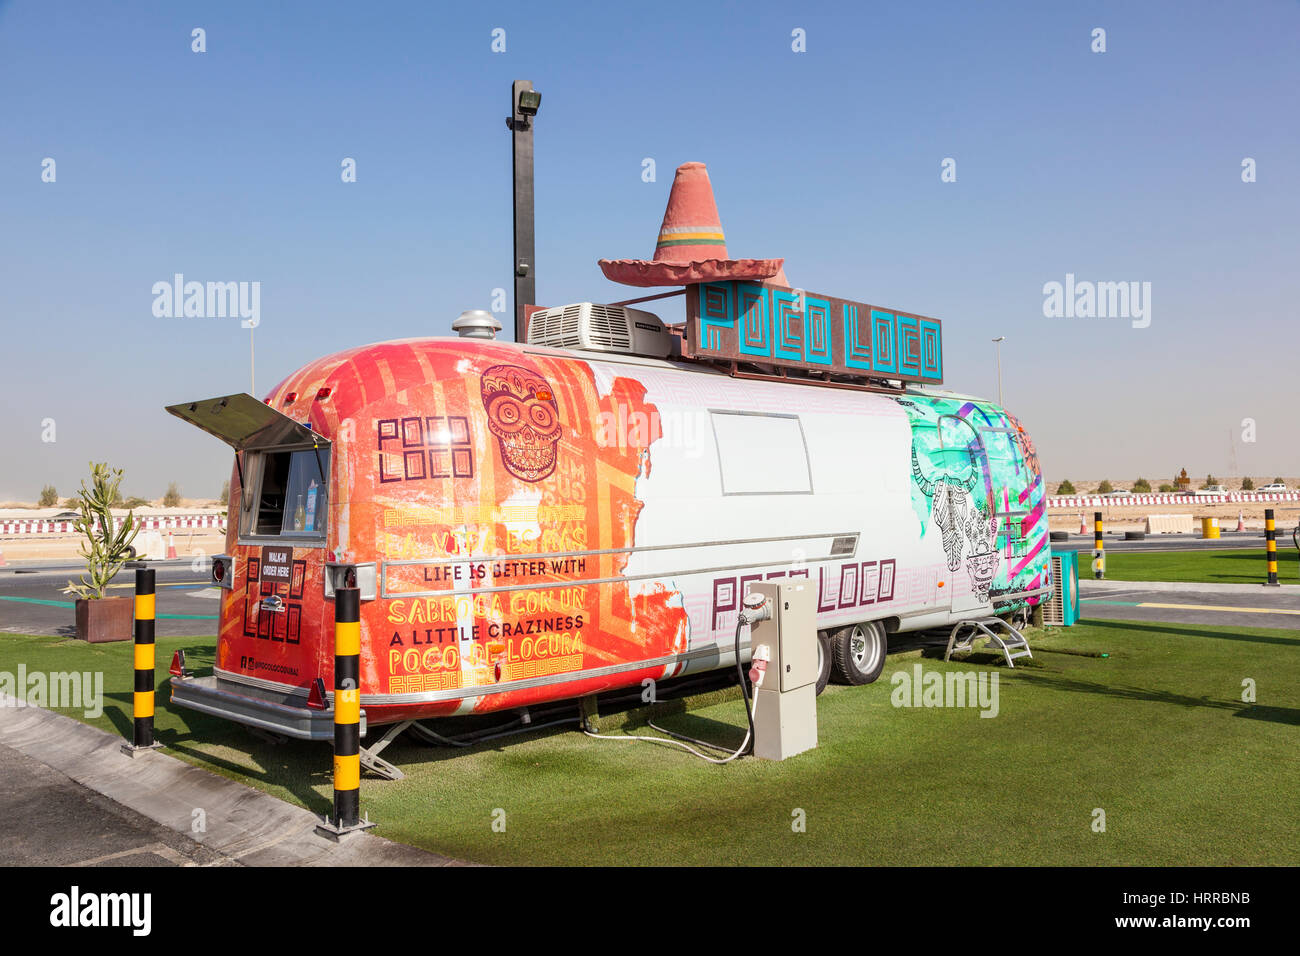 DUBAI, UAE - NOV 27, 2016: Airstream caravan converted to a food truck at the Last Exit food trucks park on the E11 highway between Abu Dhabi and Duba Stock Photo